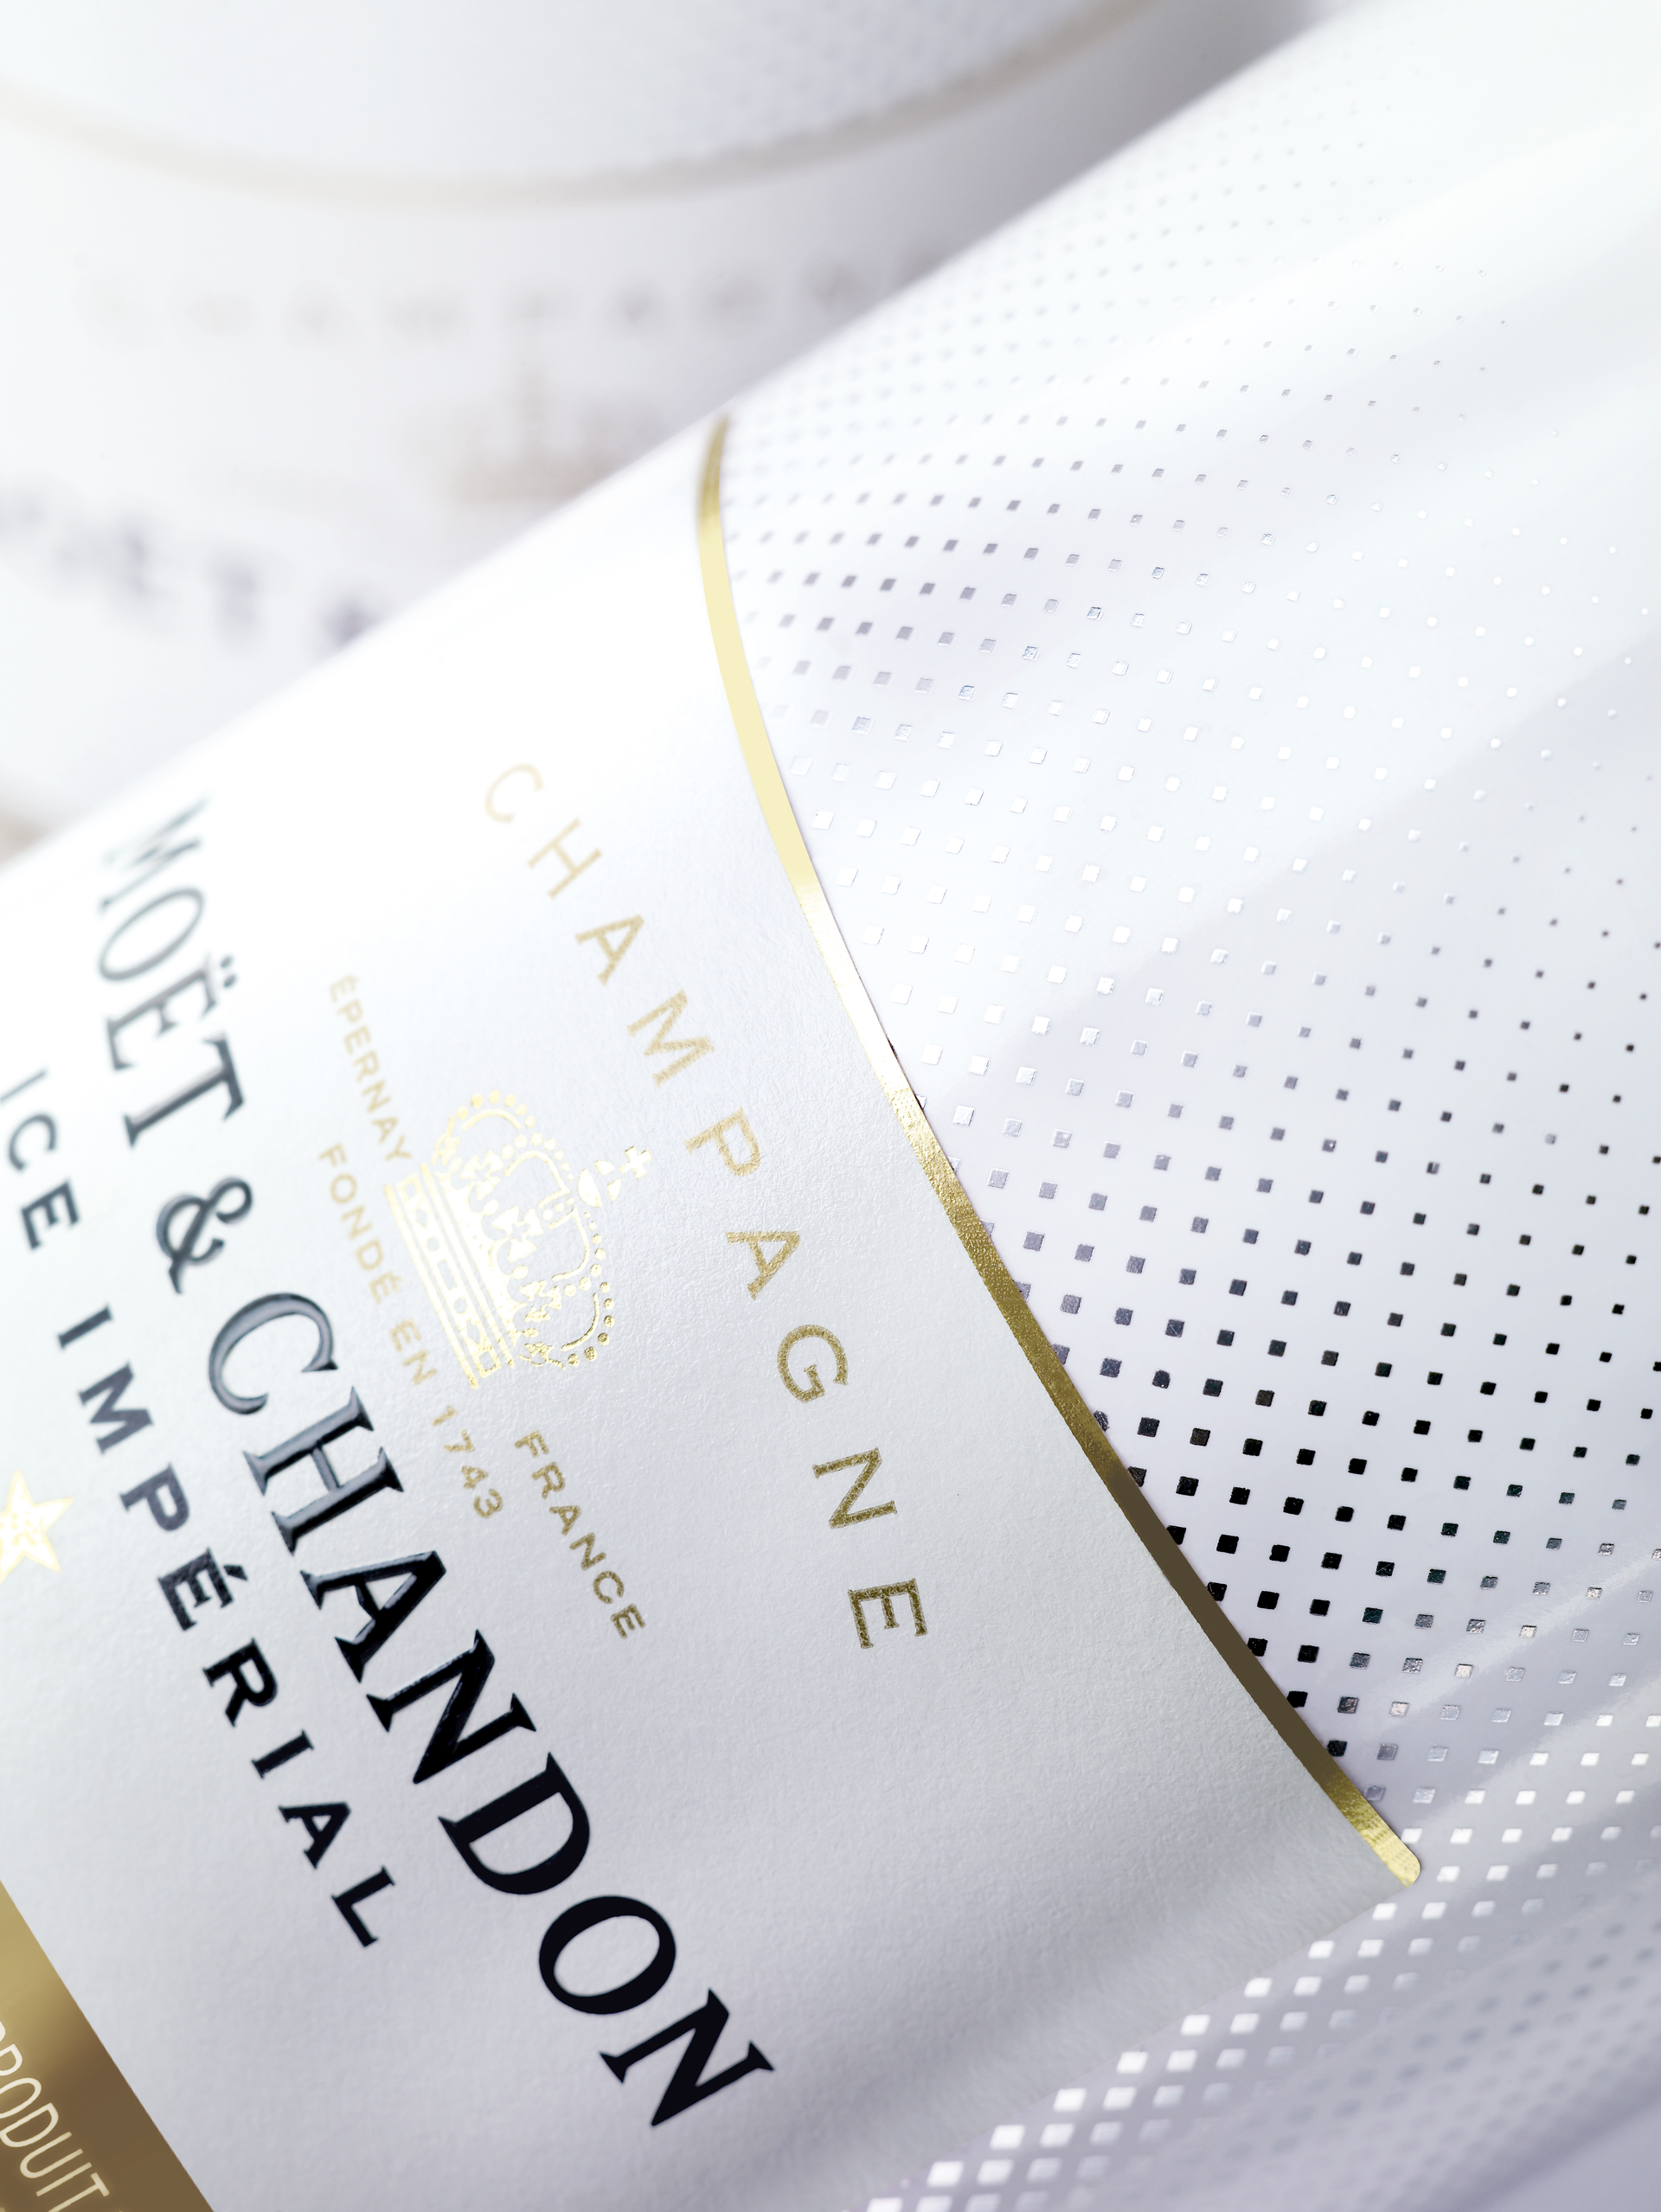 Moet & Chandon ICE Imperial